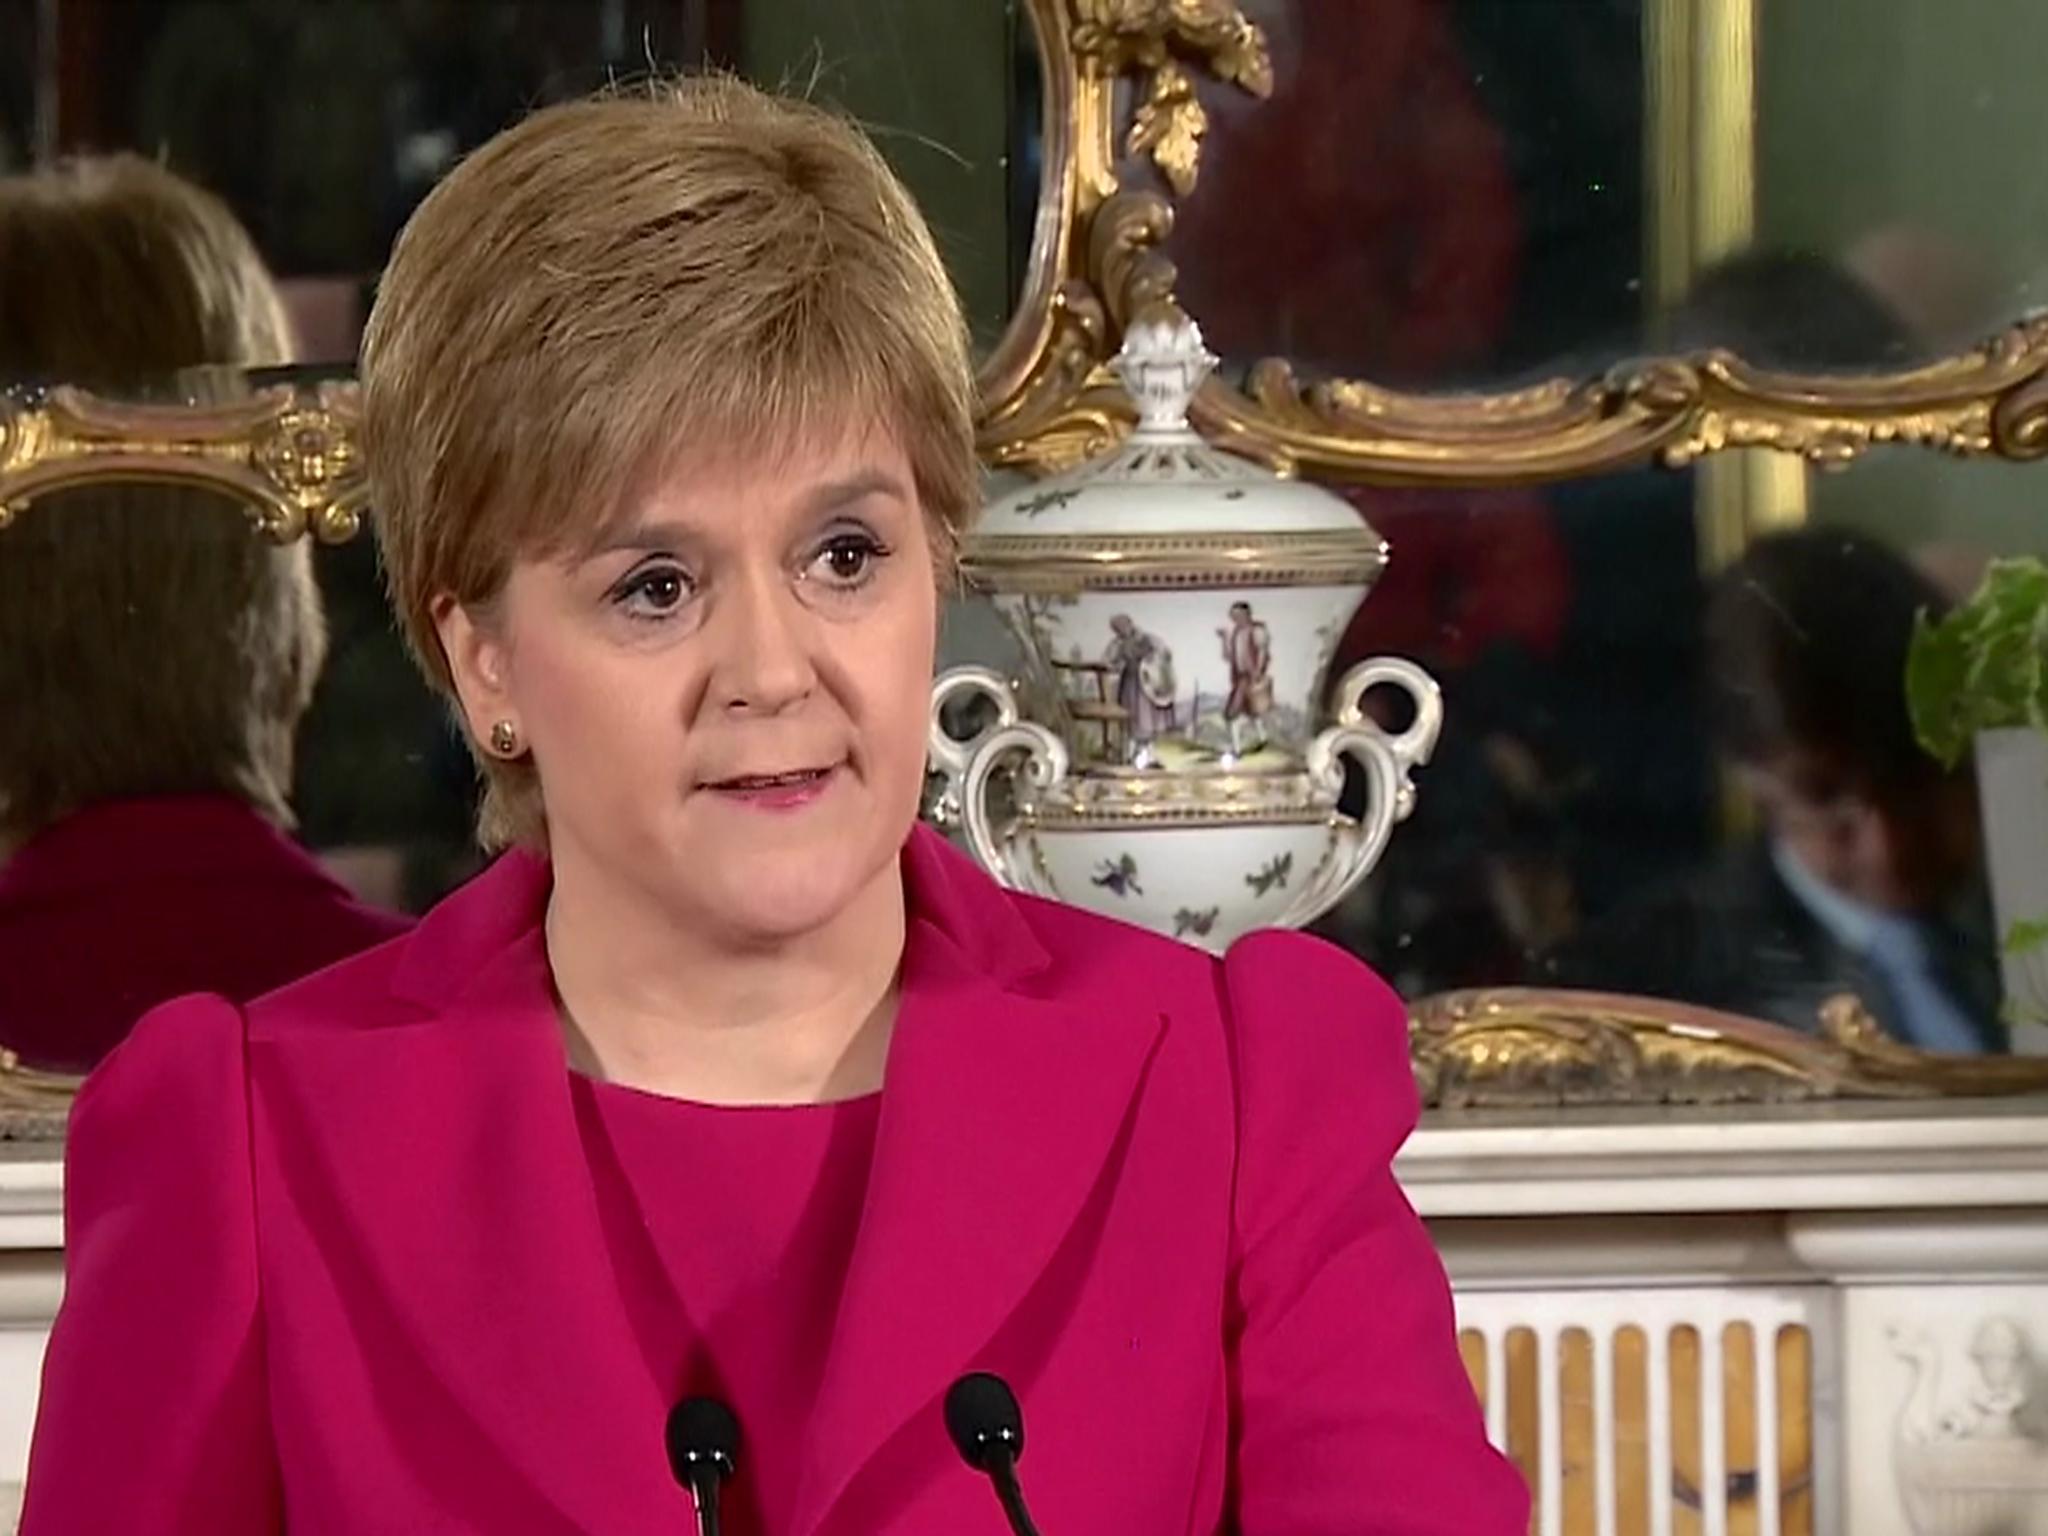 Nicola Sturgeon announced that she intends to push forward with indyref2